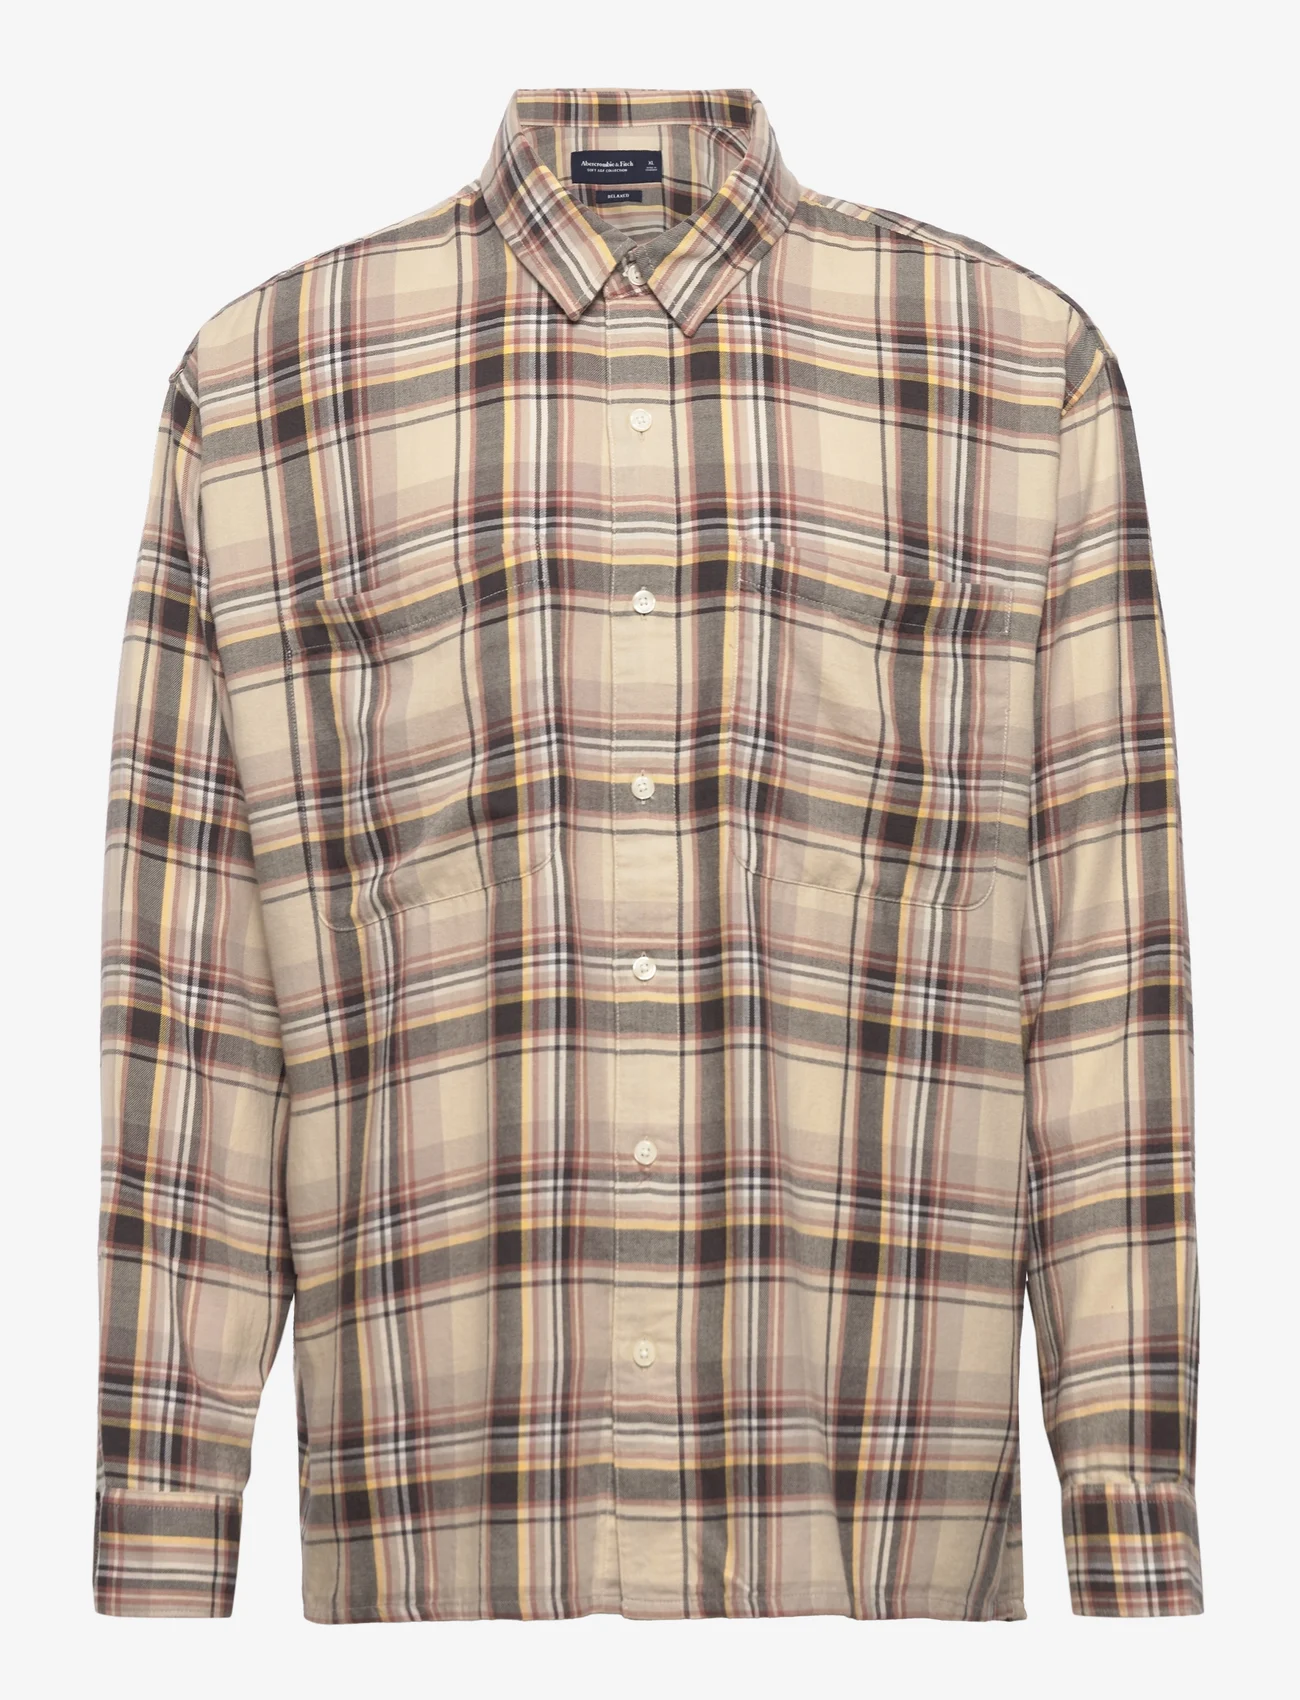 Abercrombie & Fitch - ANF MENS WOVENS - ruutupaidat - brown plaid - 0